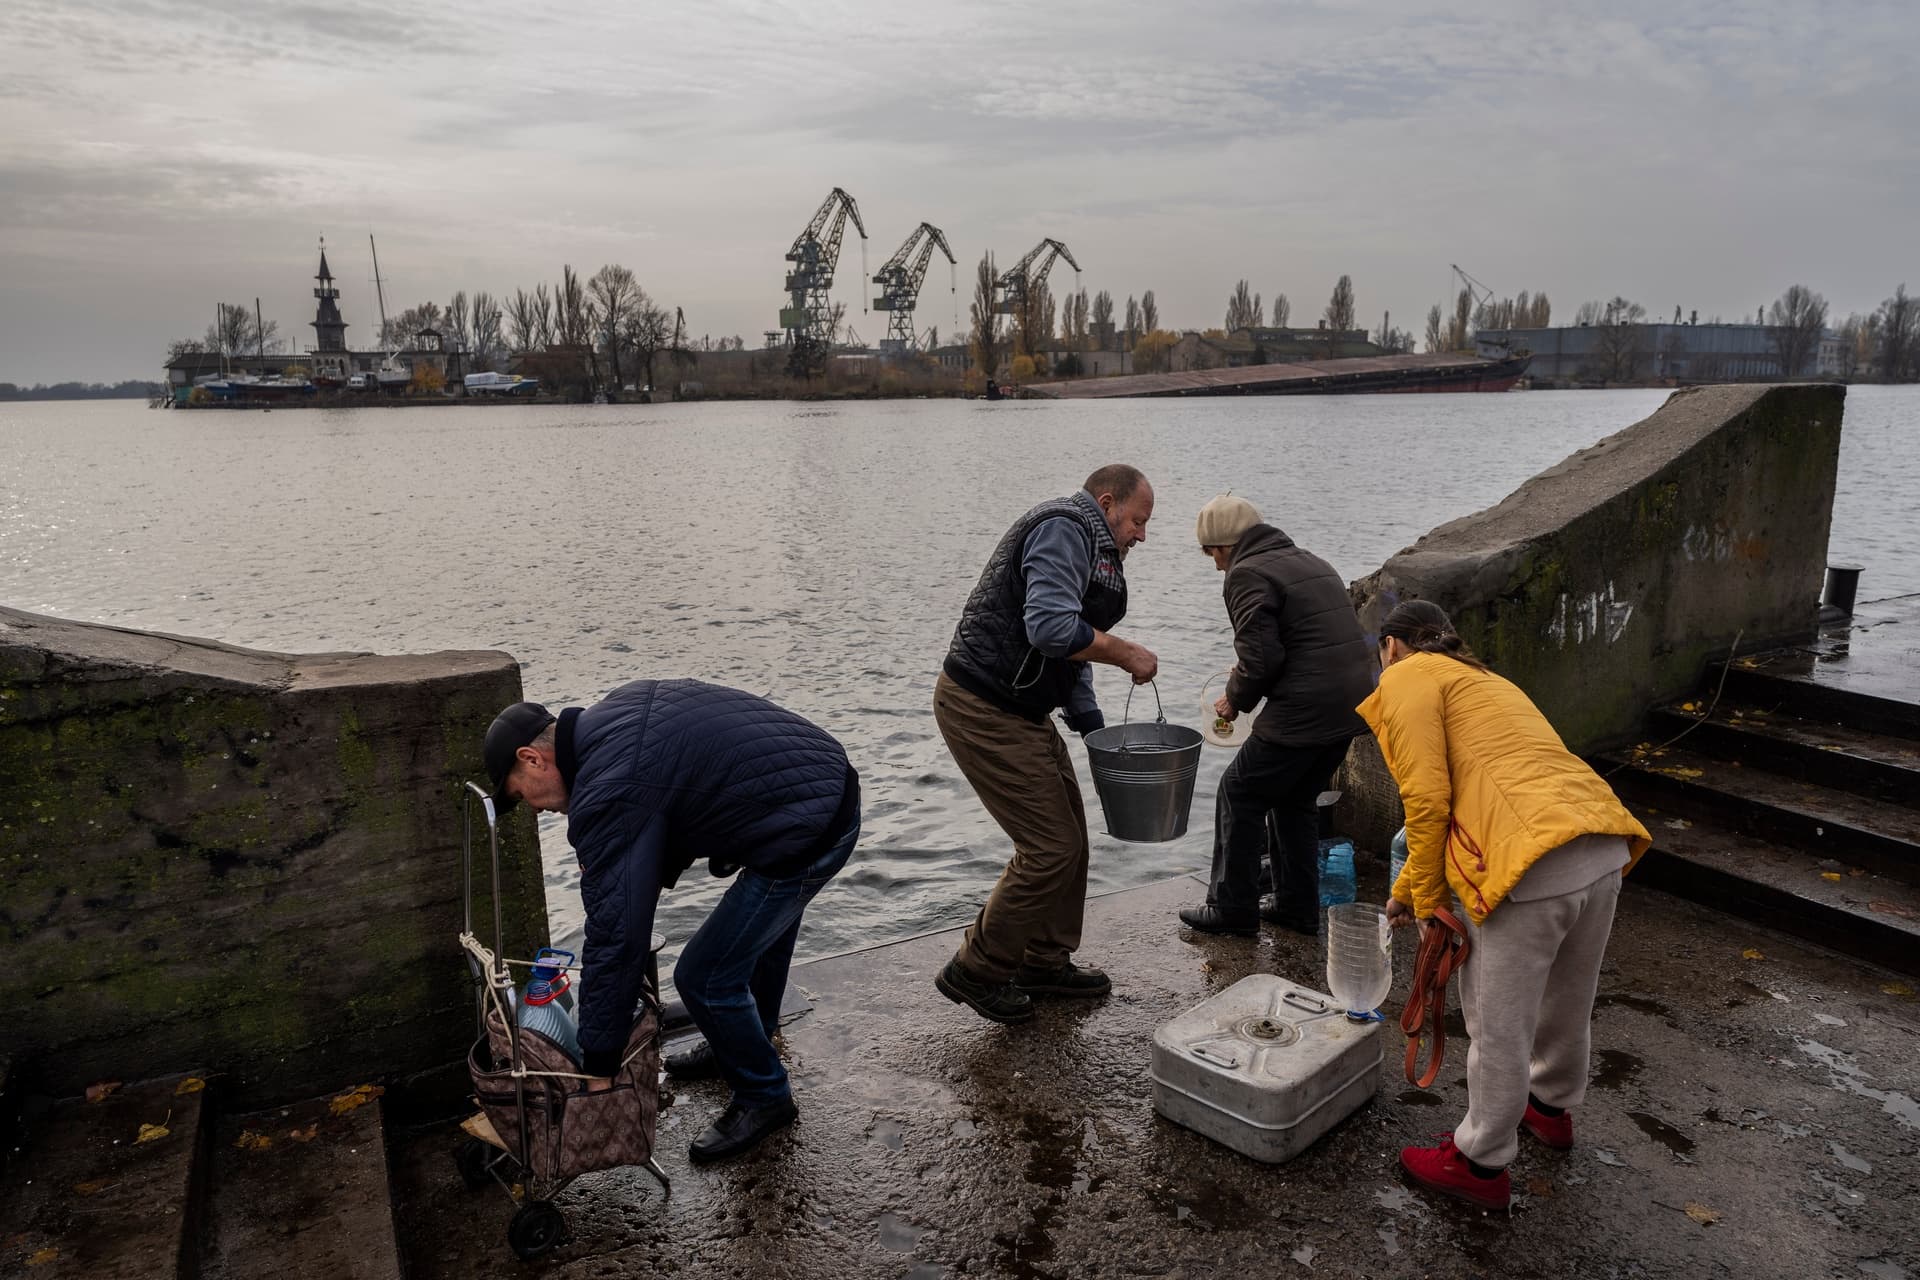 Residents of the recently liberated city of Kherson collect water from the Dnipro river bank